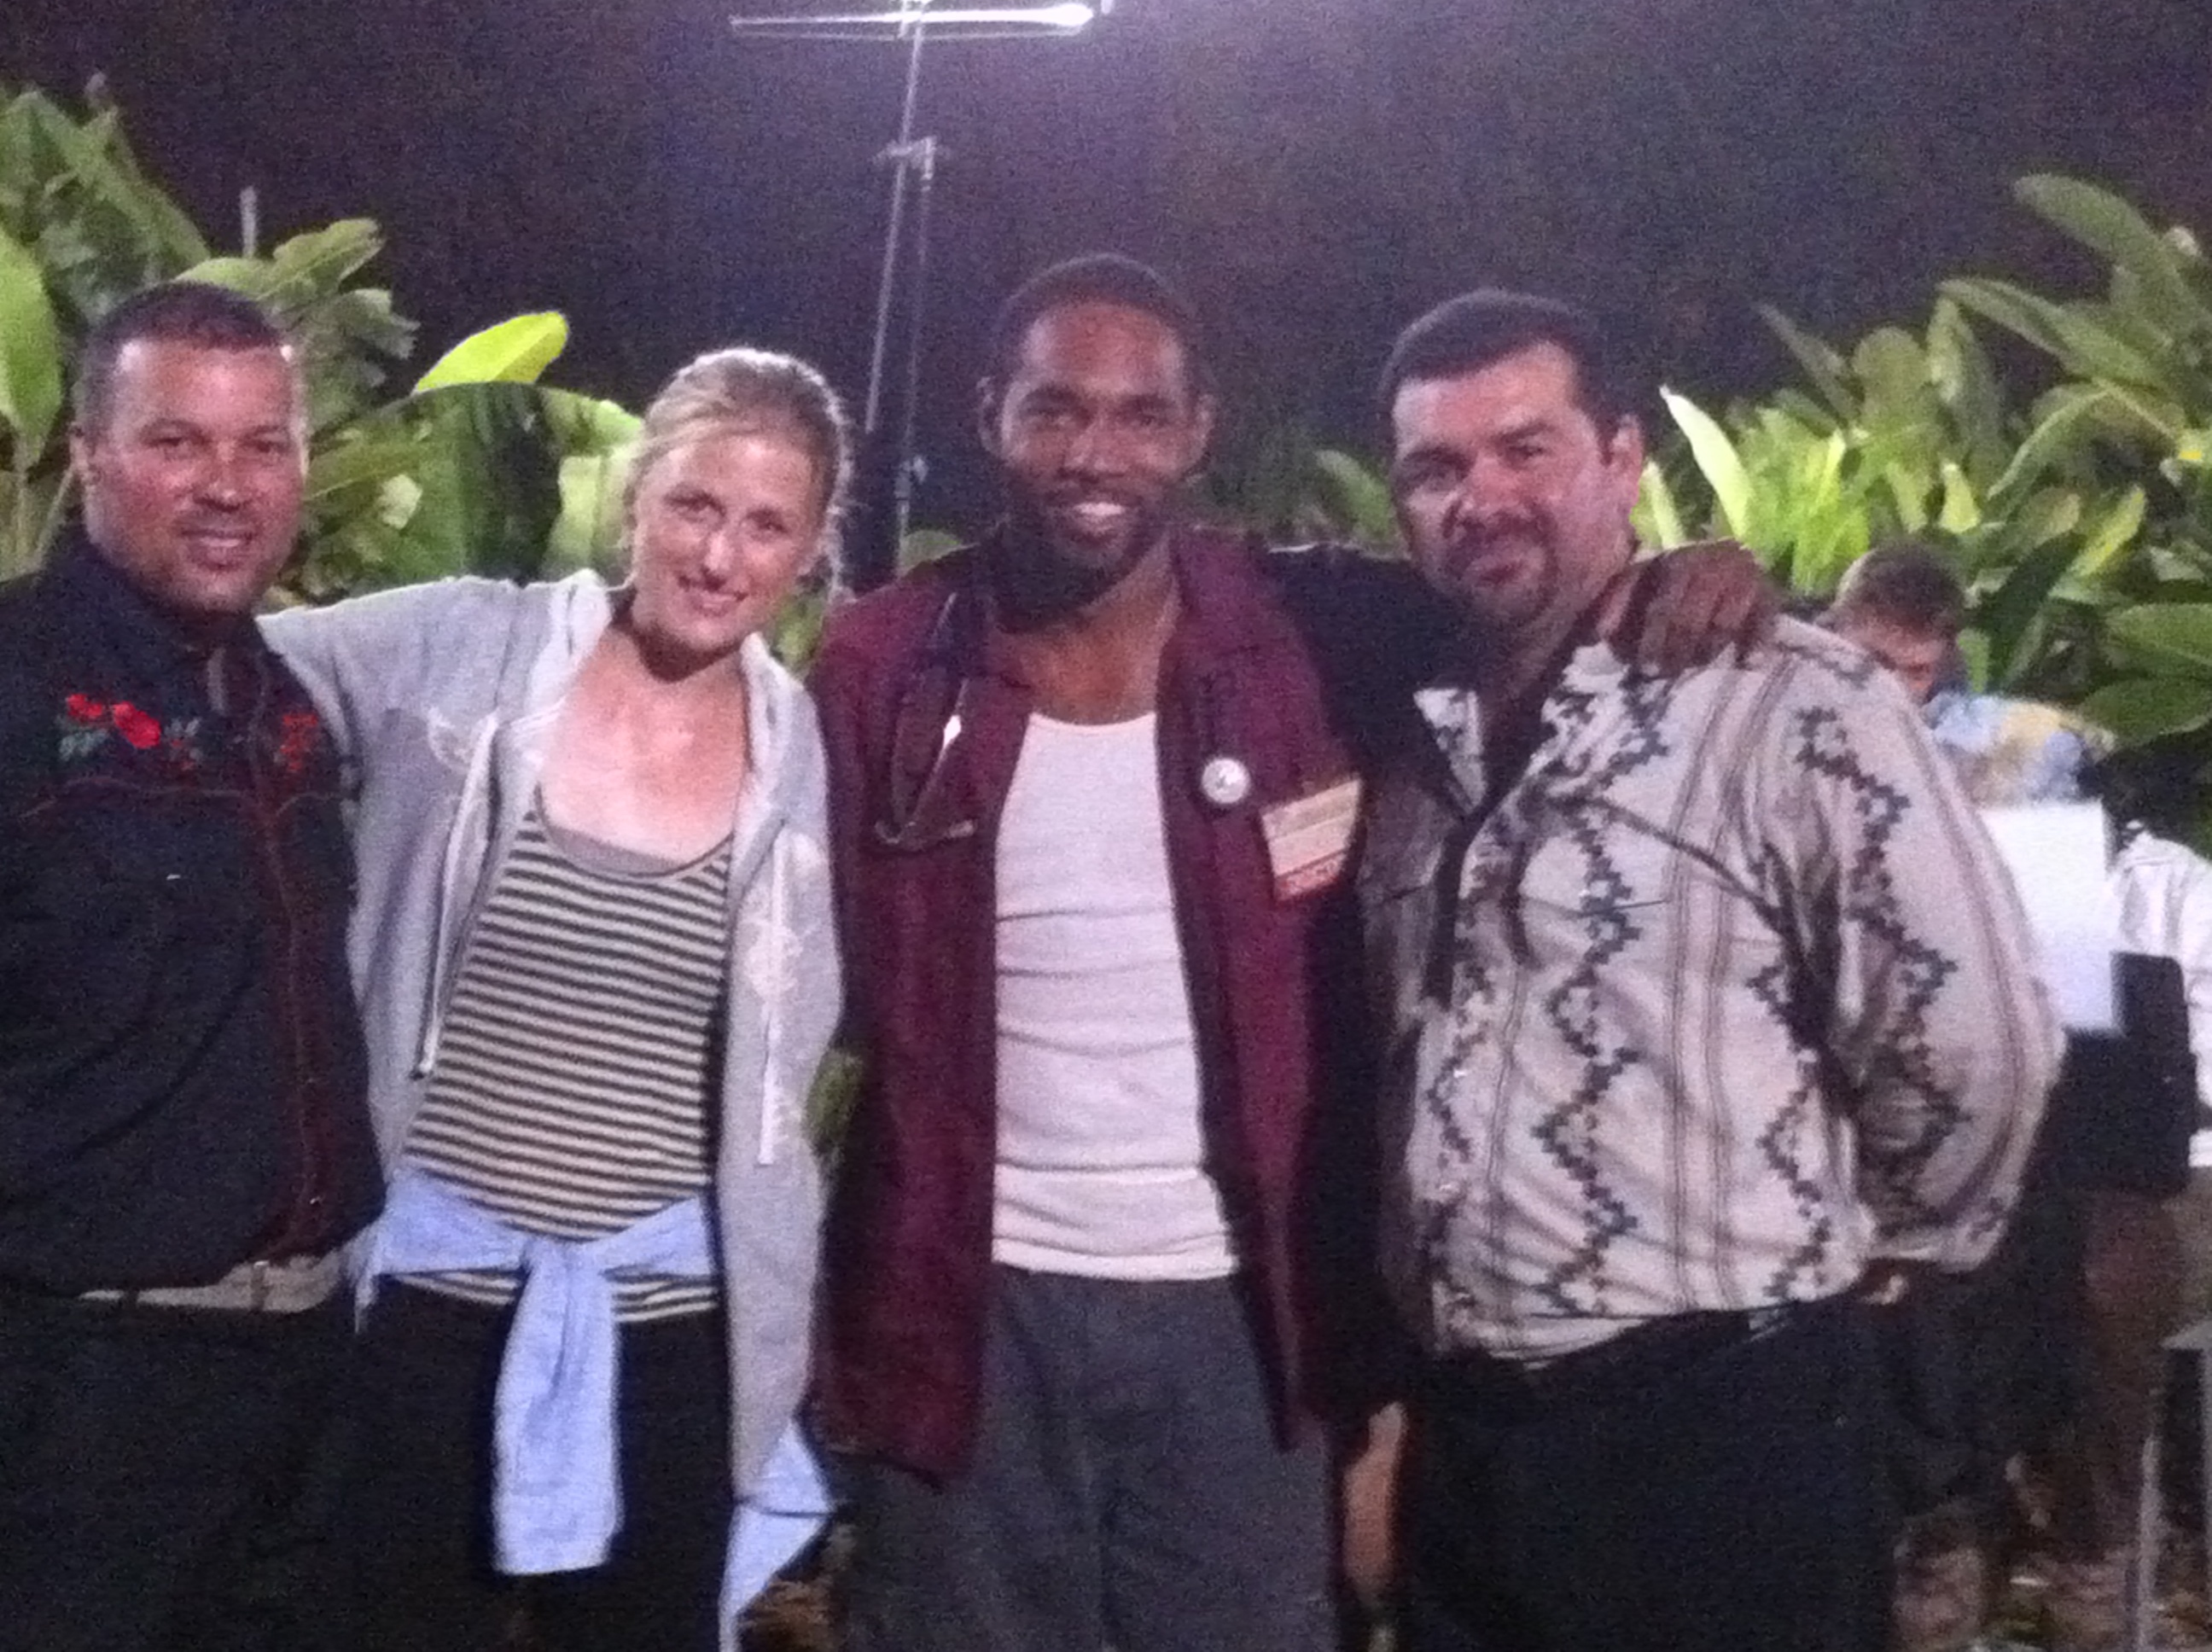 On the set on Off the Map with Mamie Gummer and Jason George